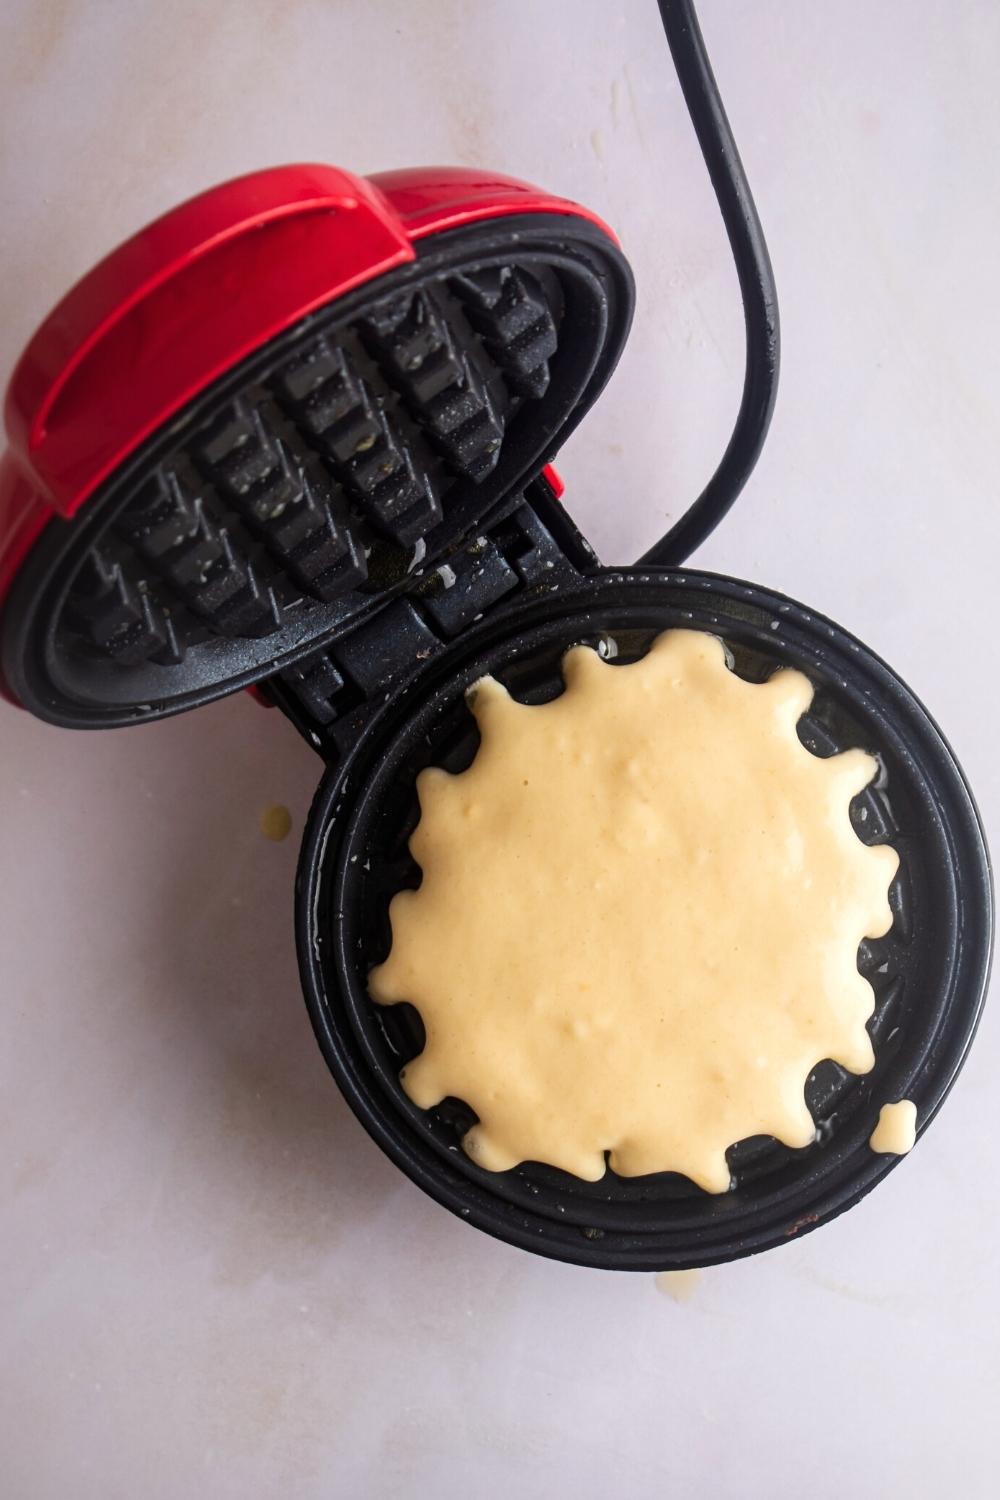 Waffle batter in a opened waffle iron.